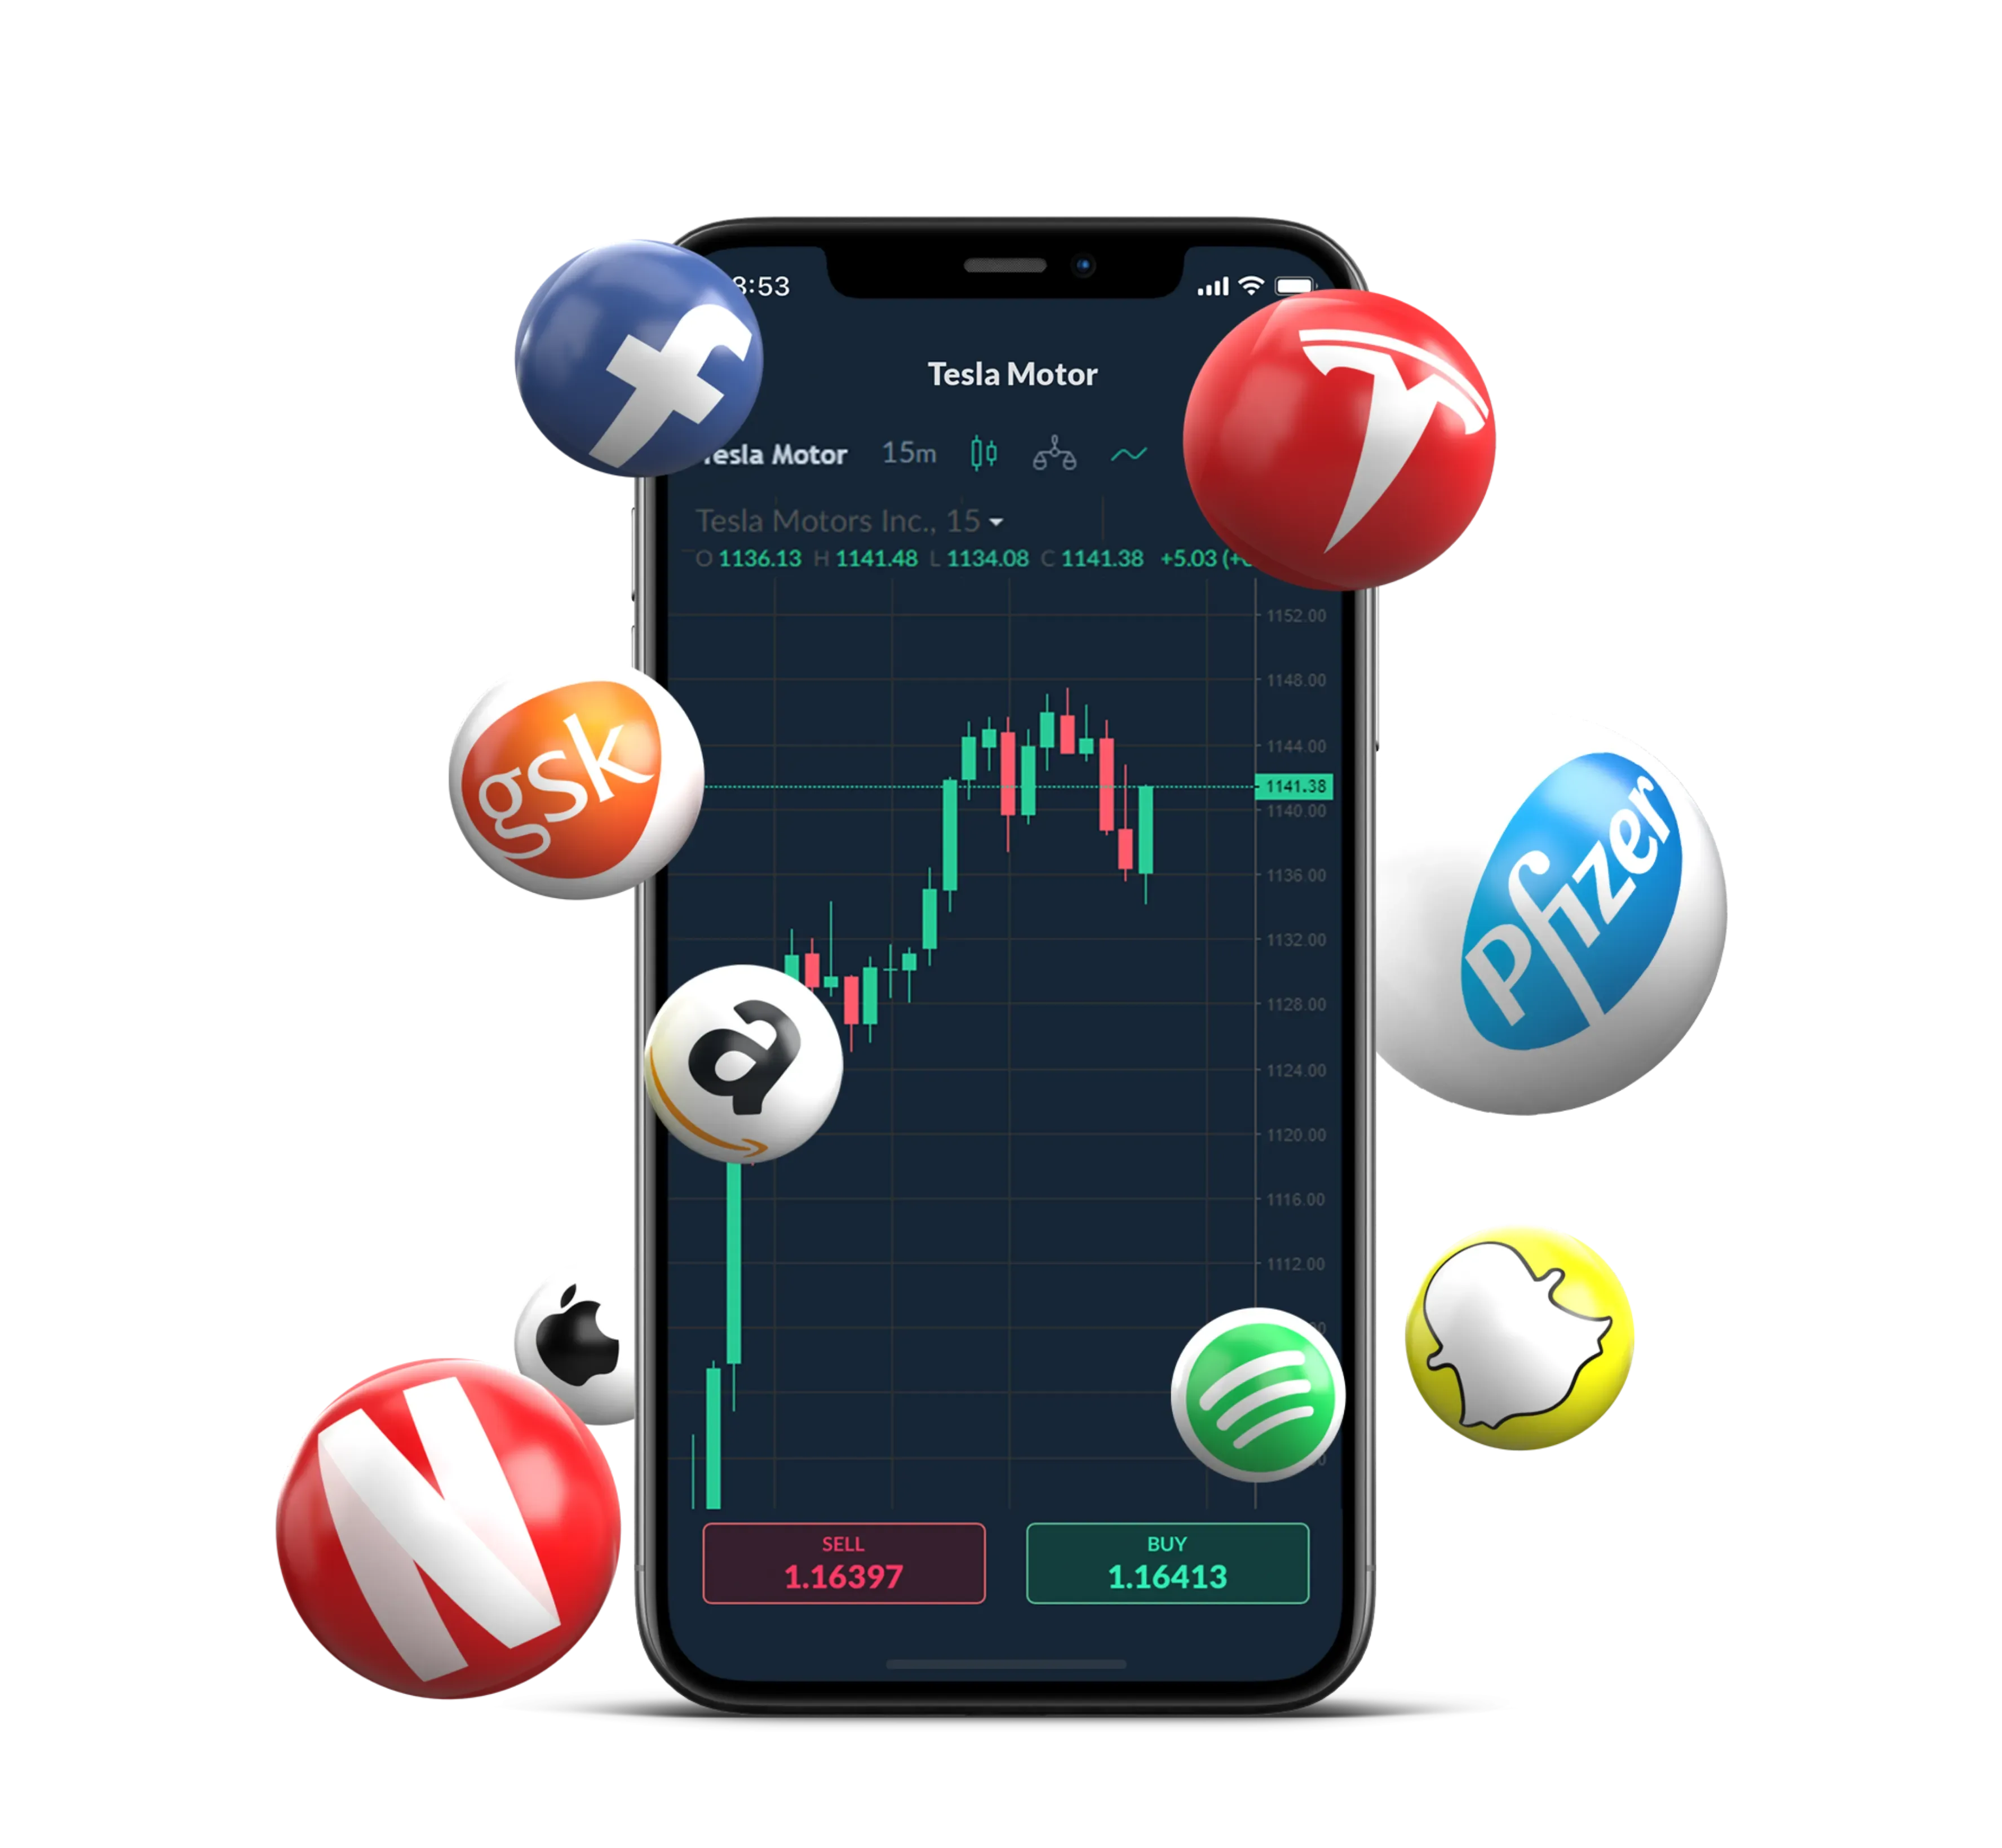 Mobile device trading stocks with Skilling App